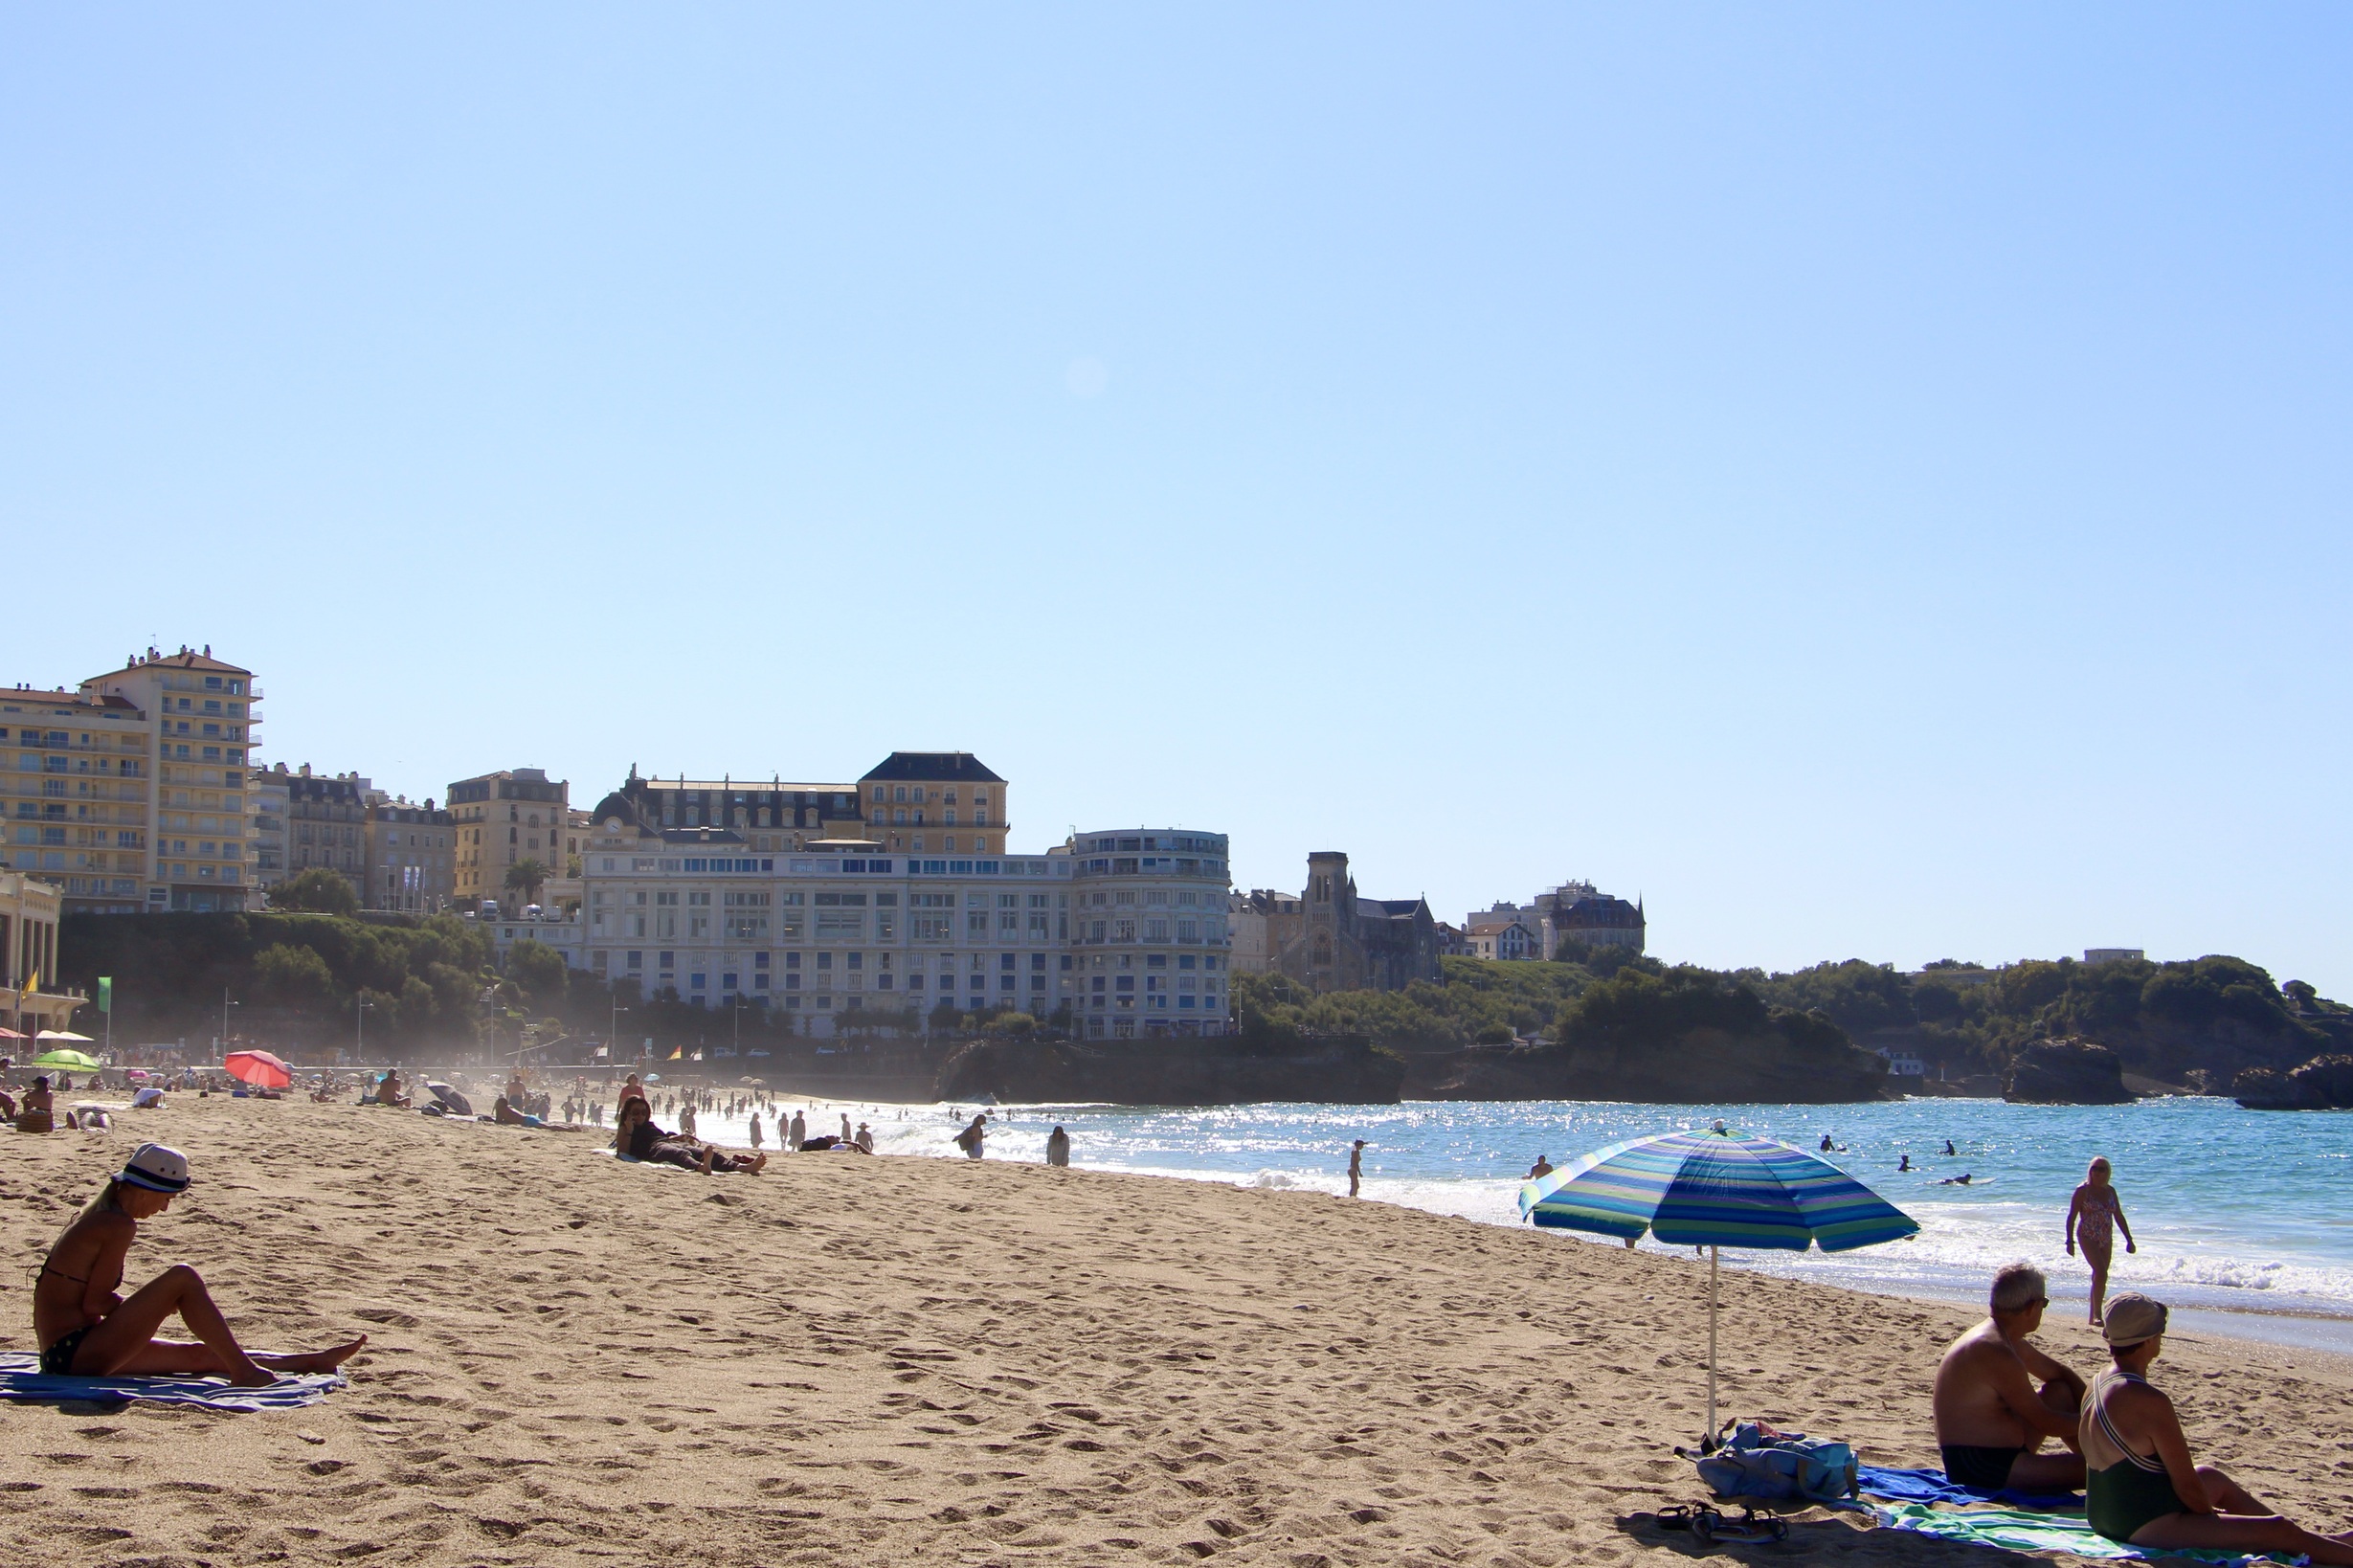 A sunny day at the Grande Plage in Biarritz, France.